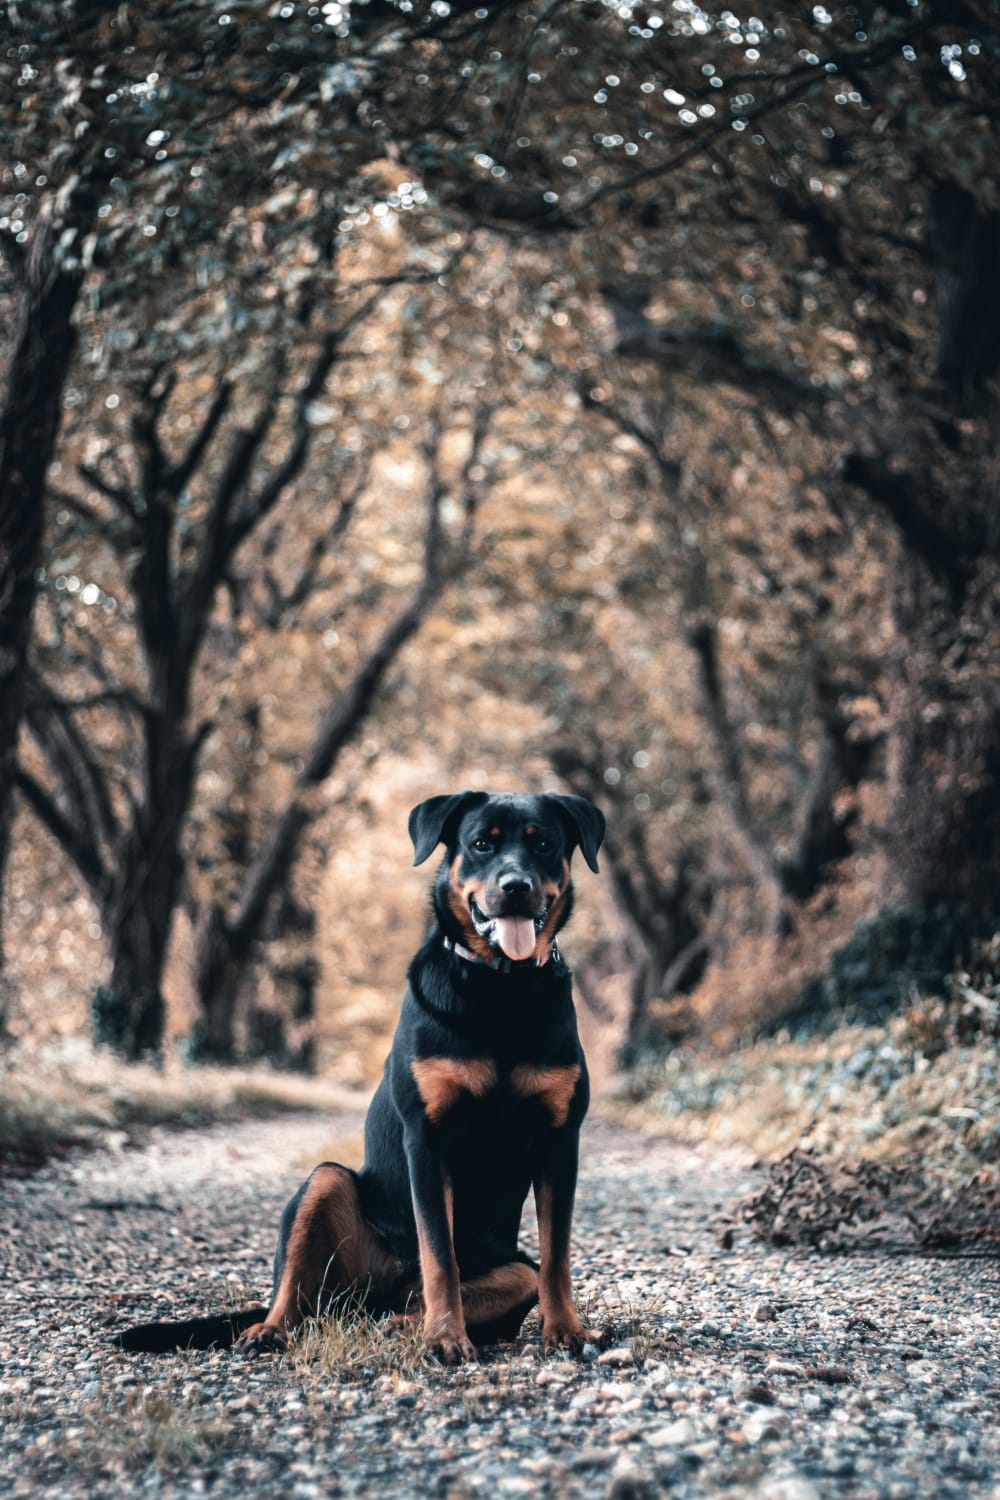 Newbie Photographer. Picture taken in my local area in dorset of my friends rottweiler